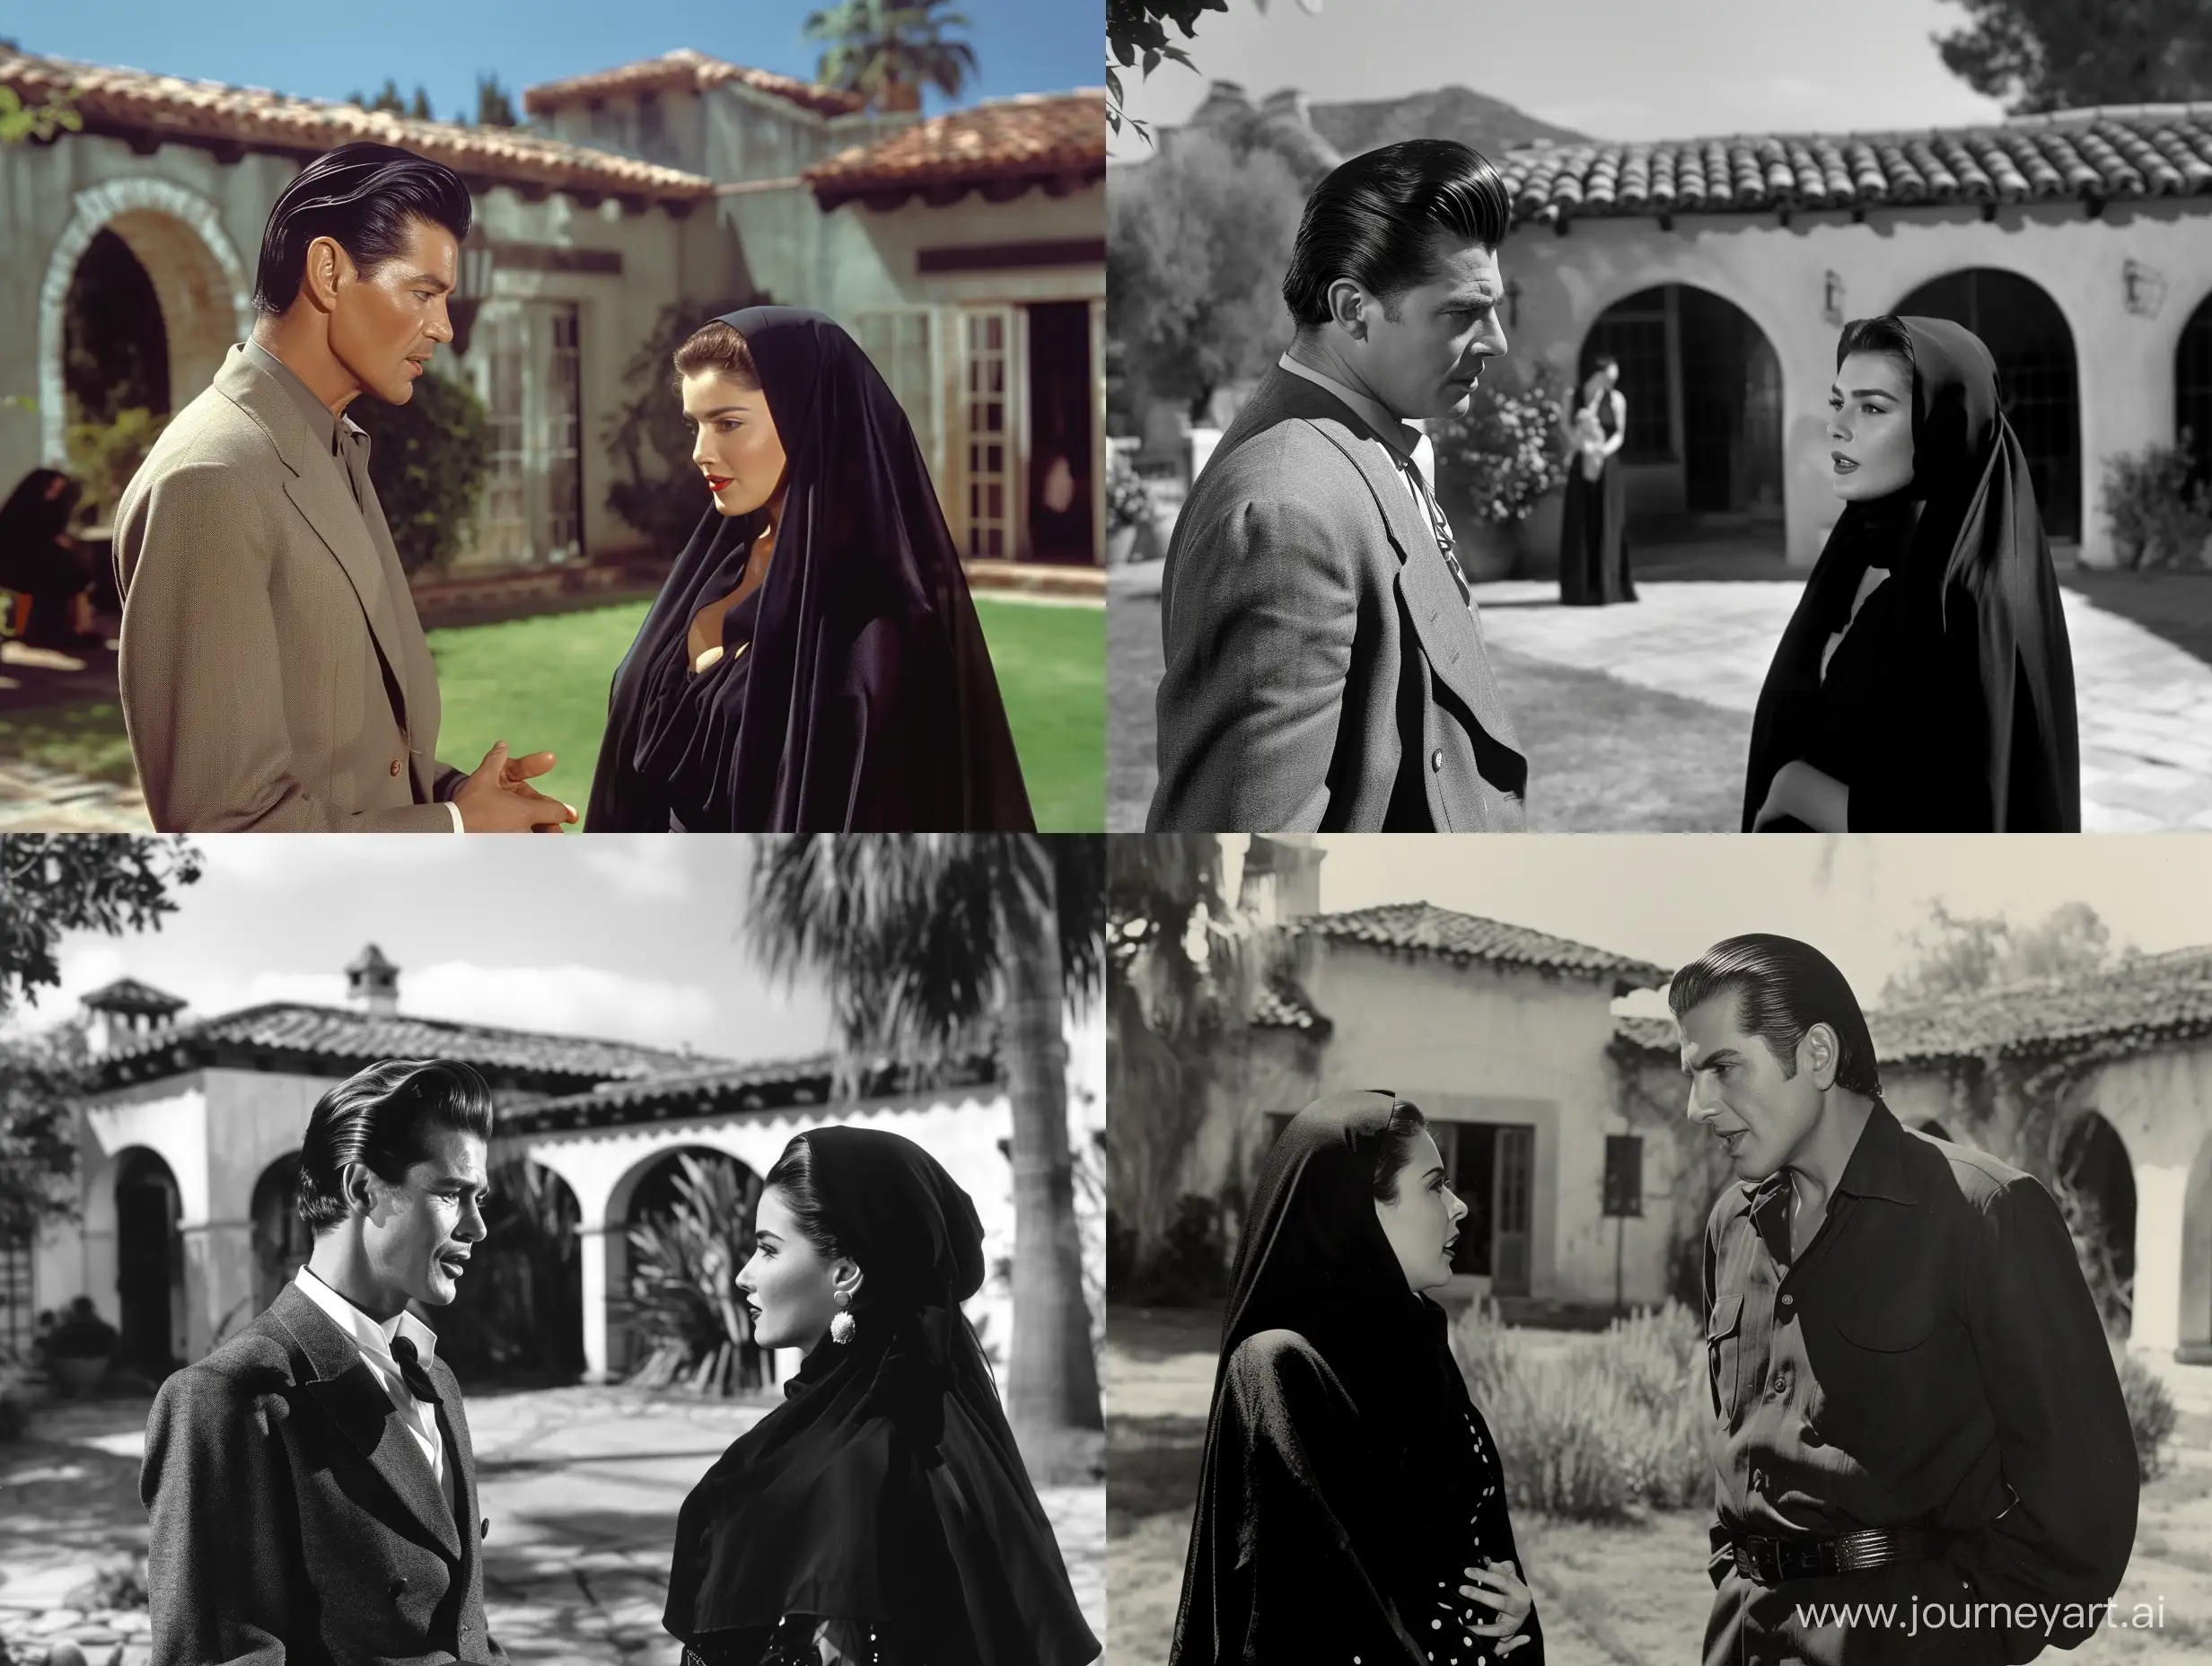 Classic-1940s-Hollywood-Actor-in-Romantic-Conversation-at-SpanishStyle-Hacienda